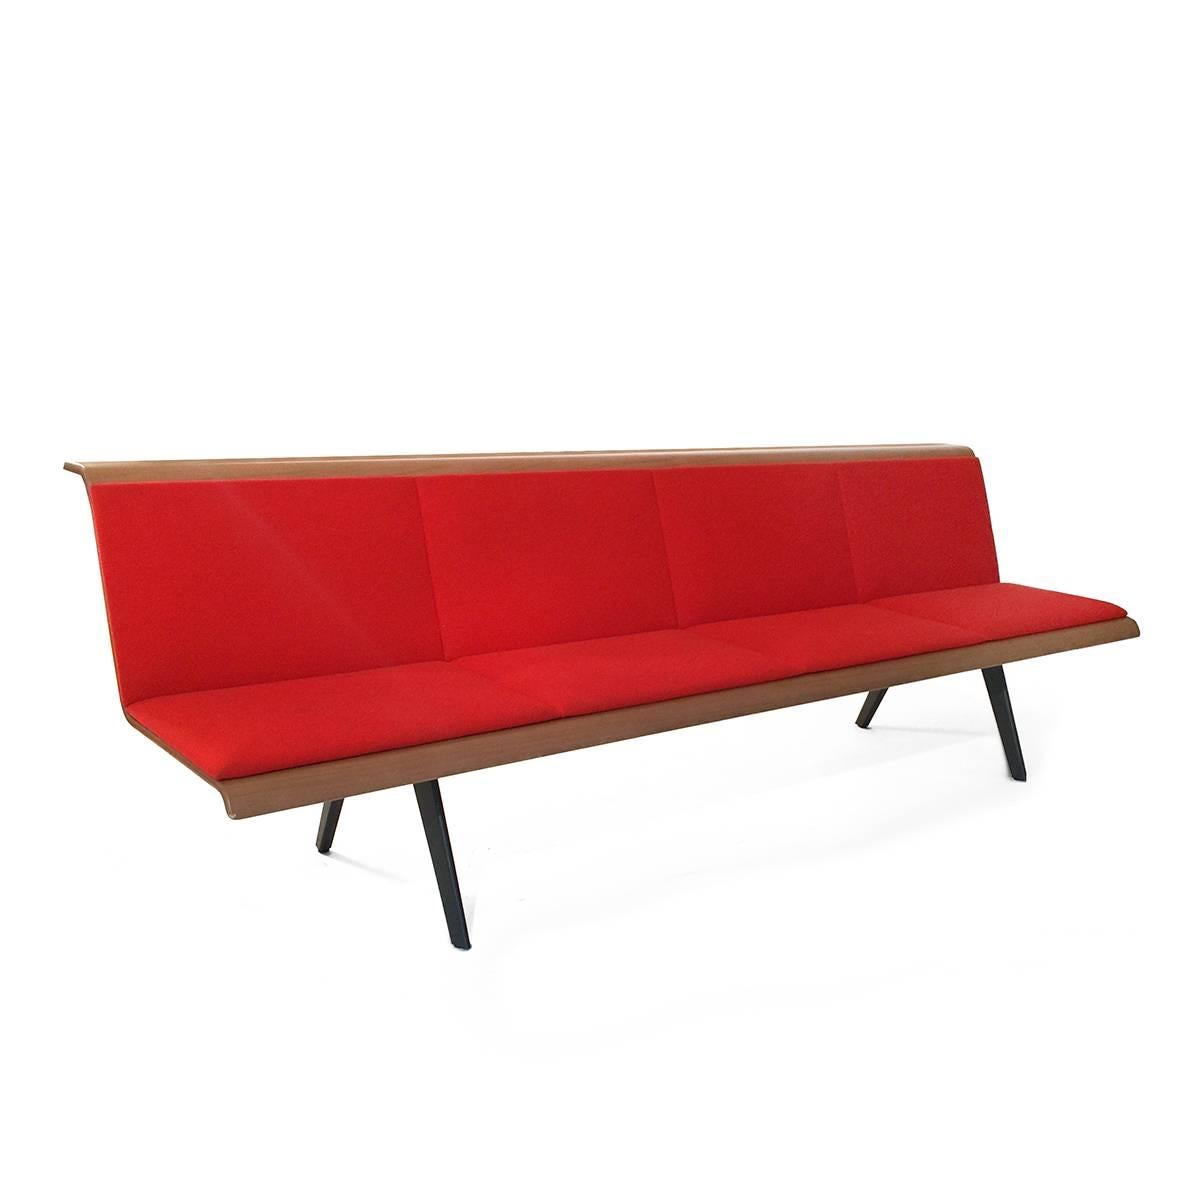 The Zinta collection by Lievore Altherr Molina is an elegant seating solution. Durable yet beautiful it works in residential or commercial applications.

Waiting bench with oak plywood frame, Kvadrat Tonus 608 seat pads.